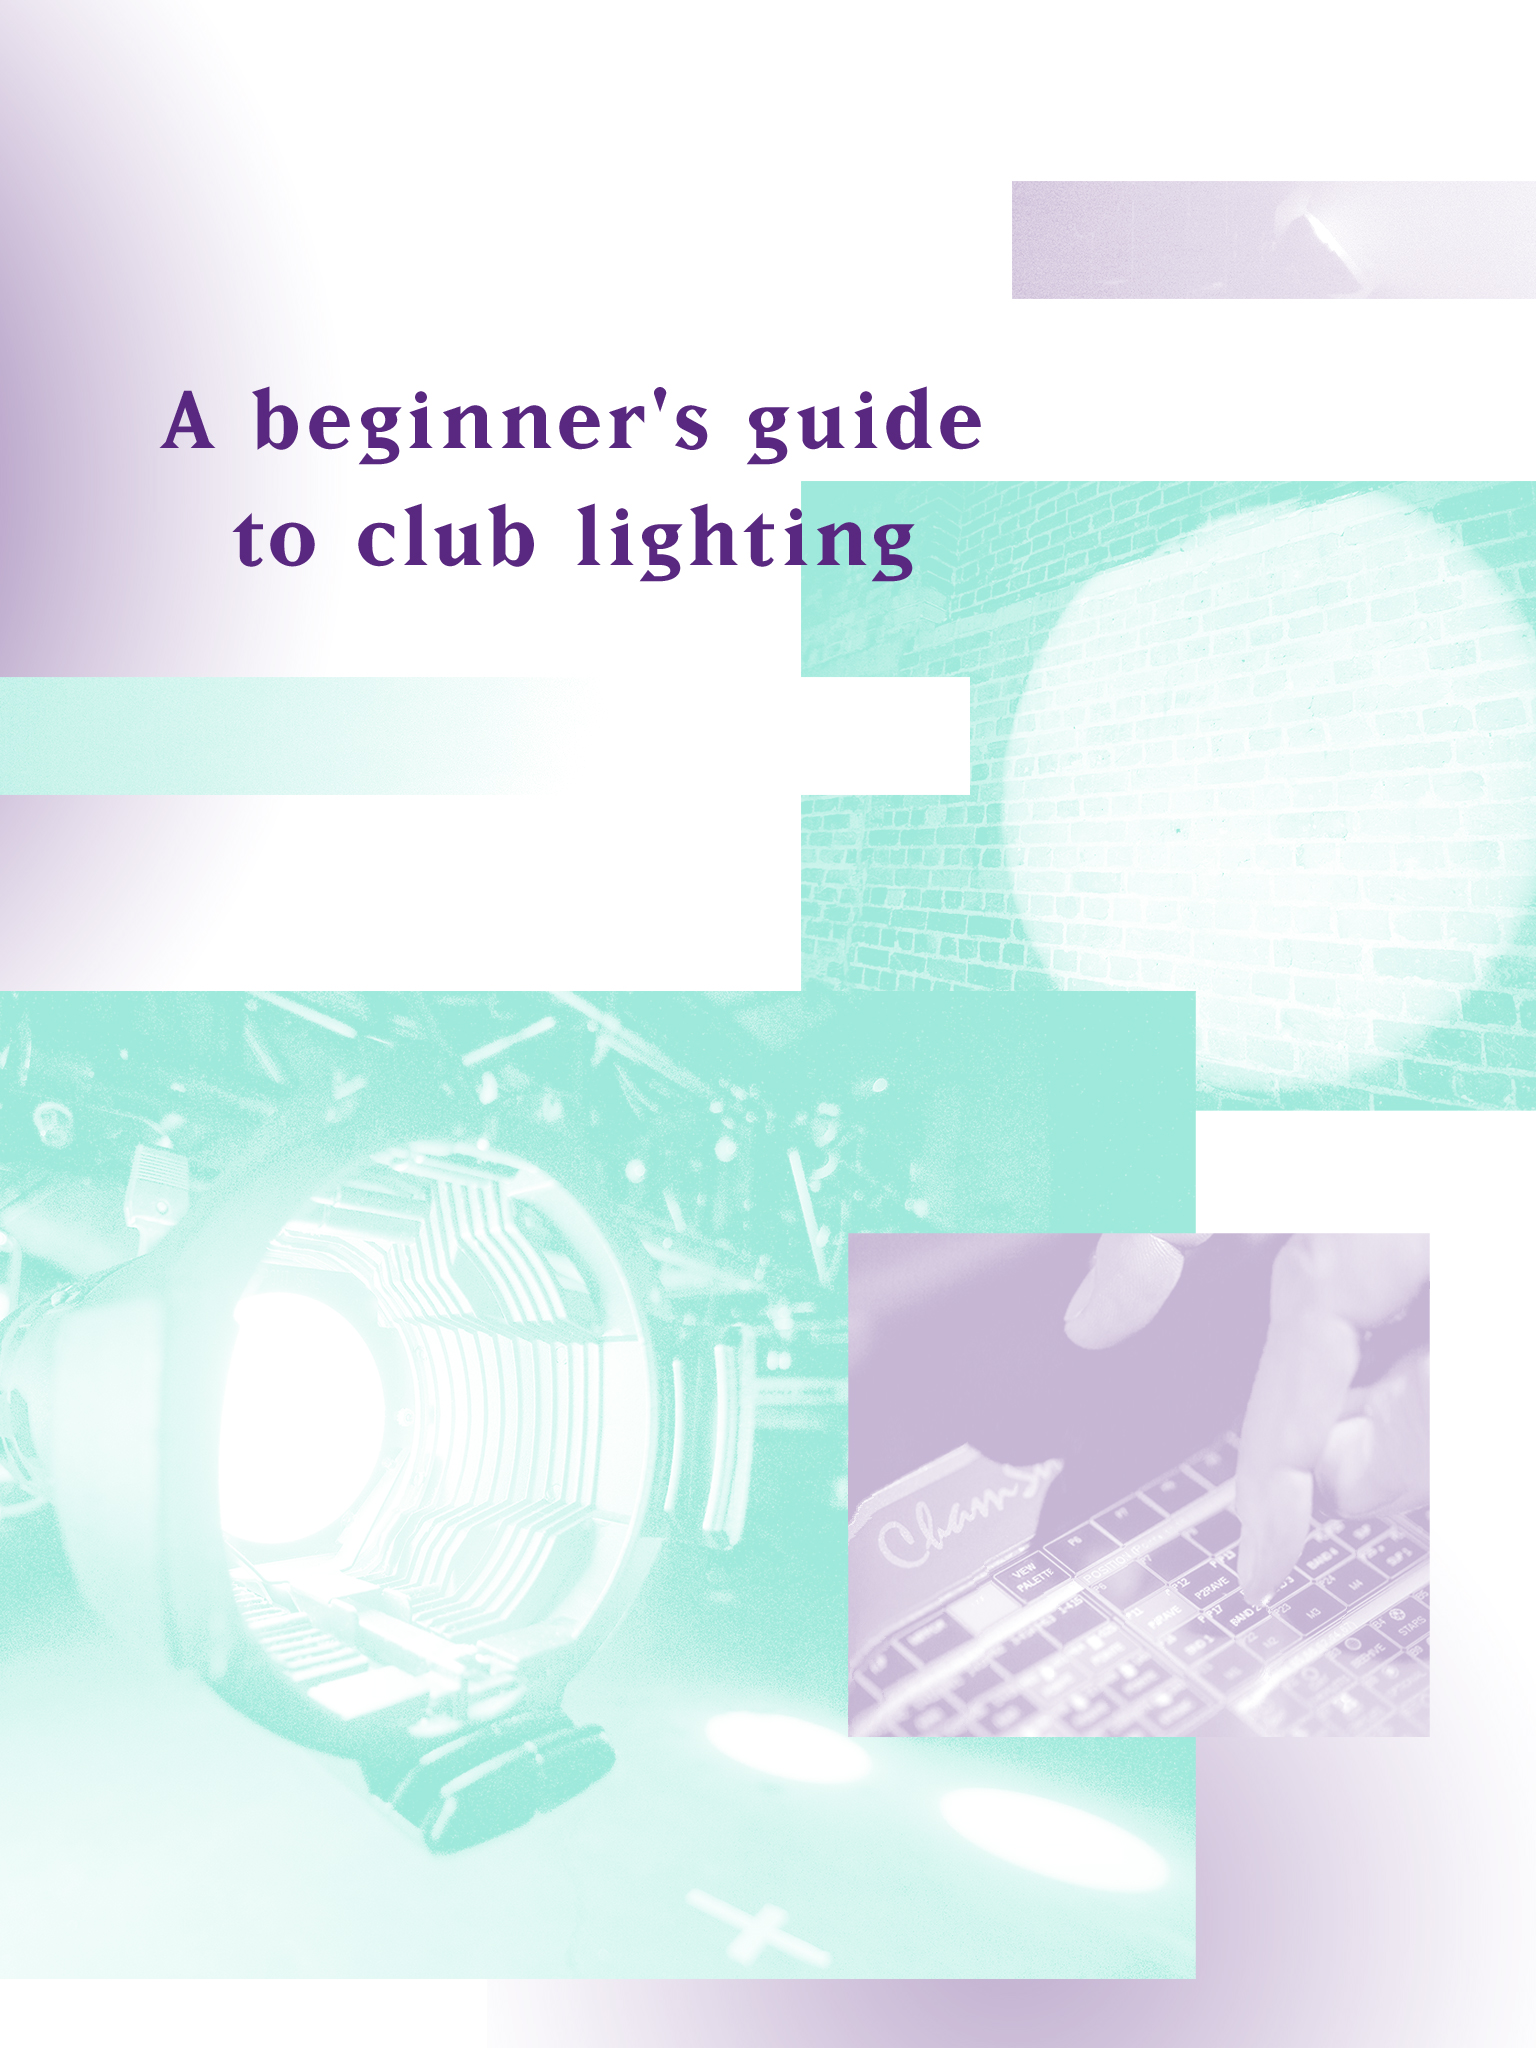 A beginner's guide to club lighting